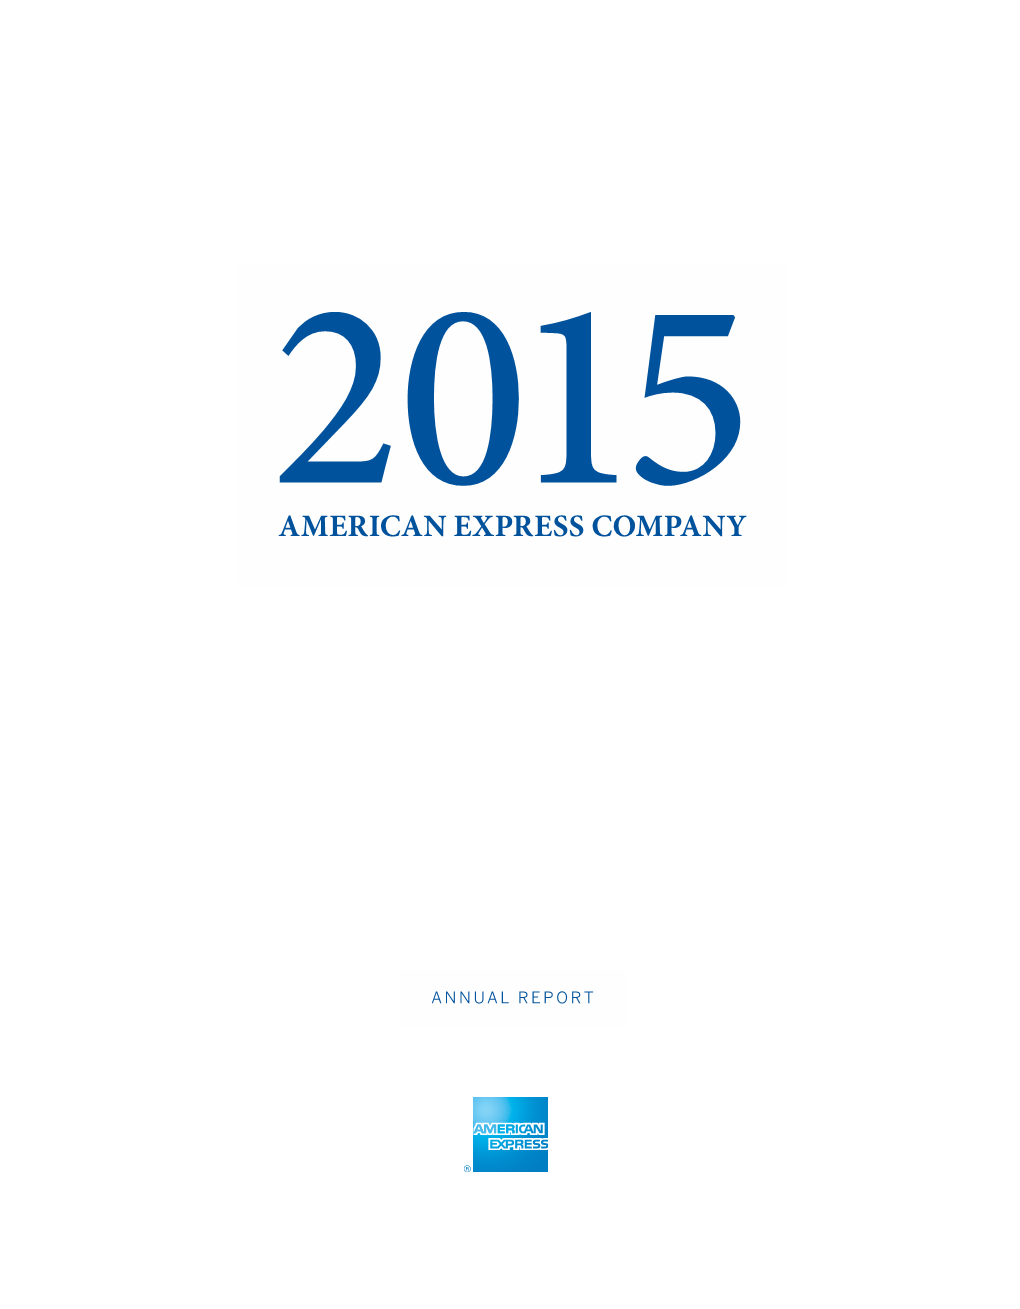 AMERICAN EXPRESS COMPANY | ANNUAL REPORT 2015 Ultimately, Though, Revenues Did Not Pick up As We Had Expected During 2015